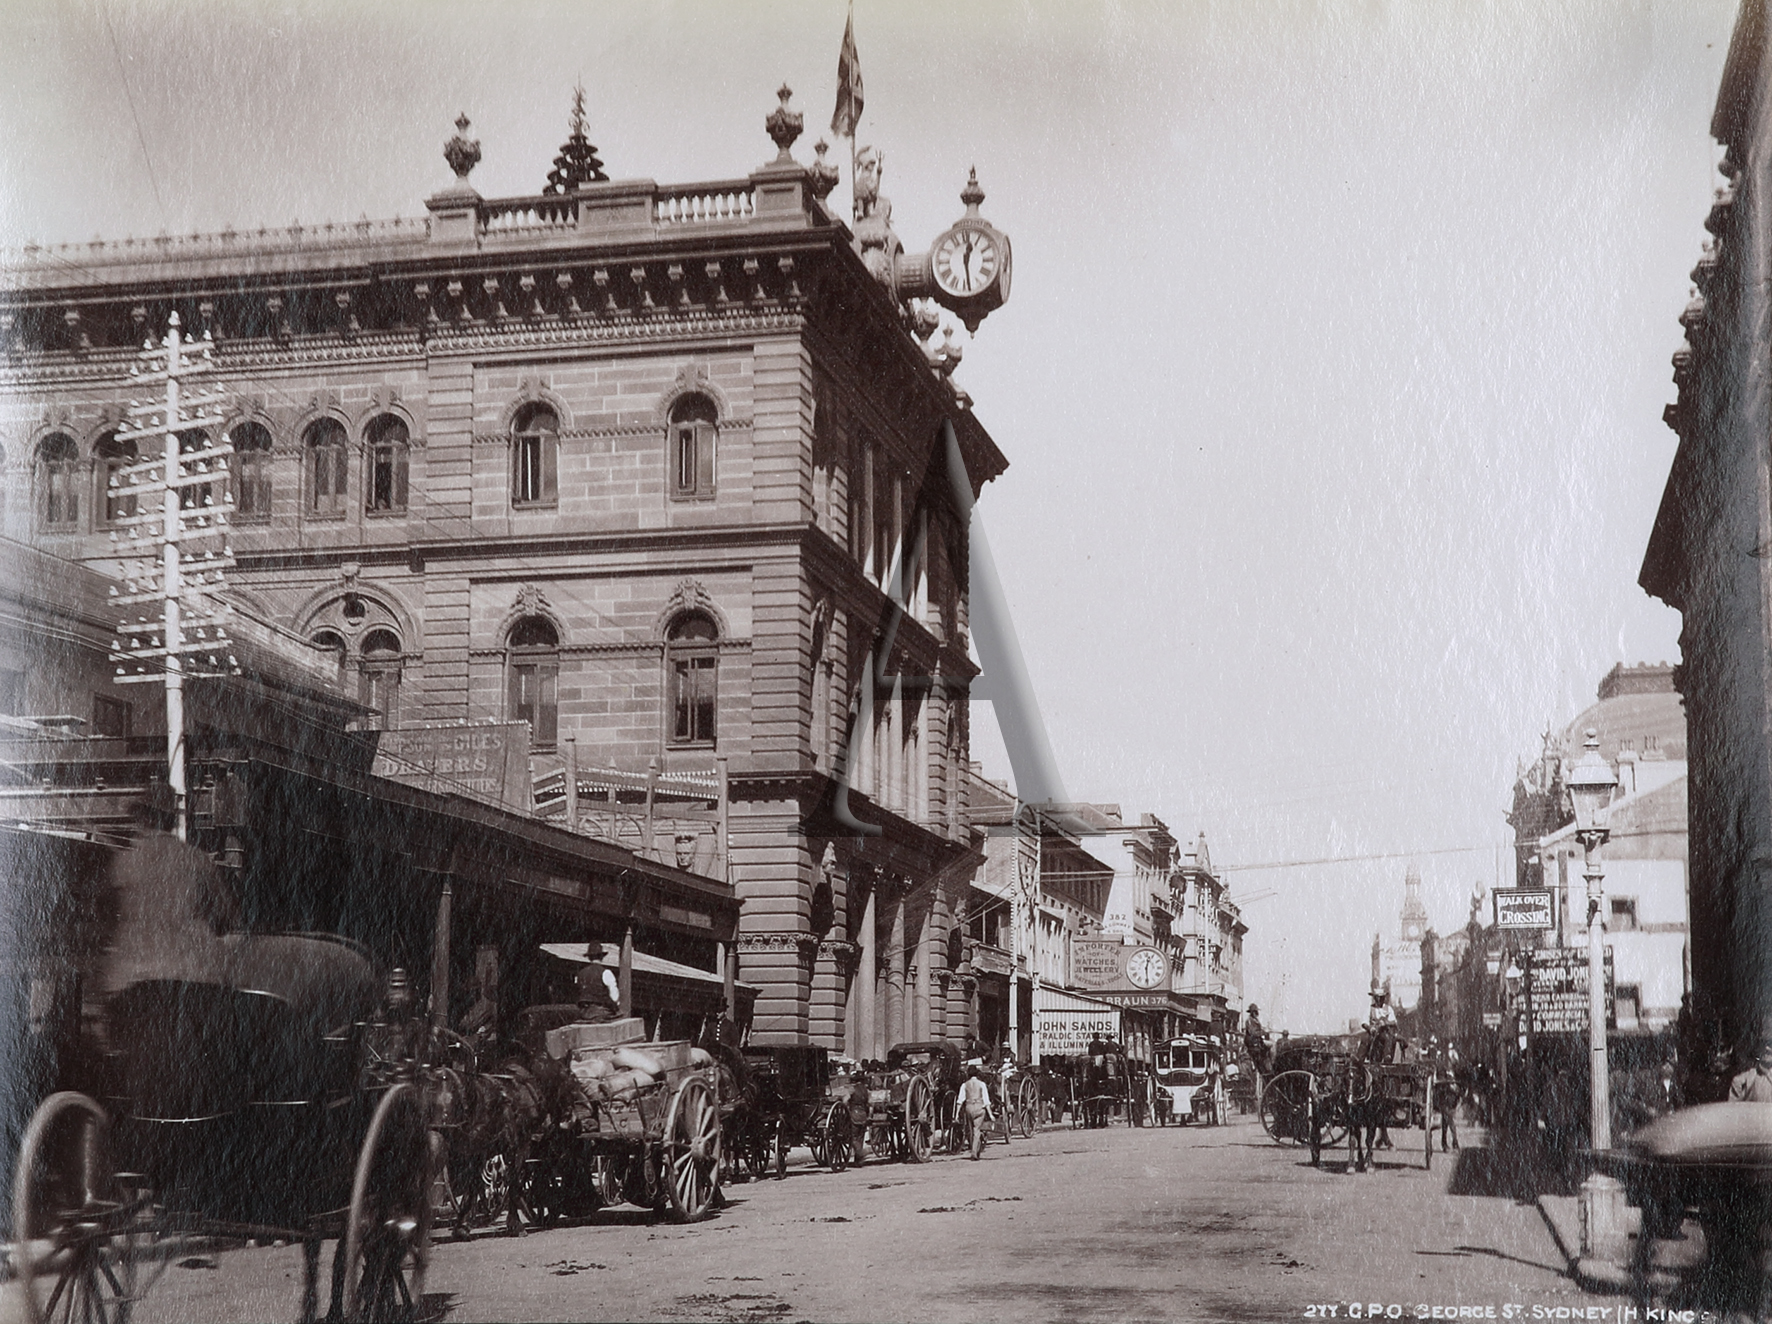 G.P.O. George St. Sydney - Antique Print from 1880